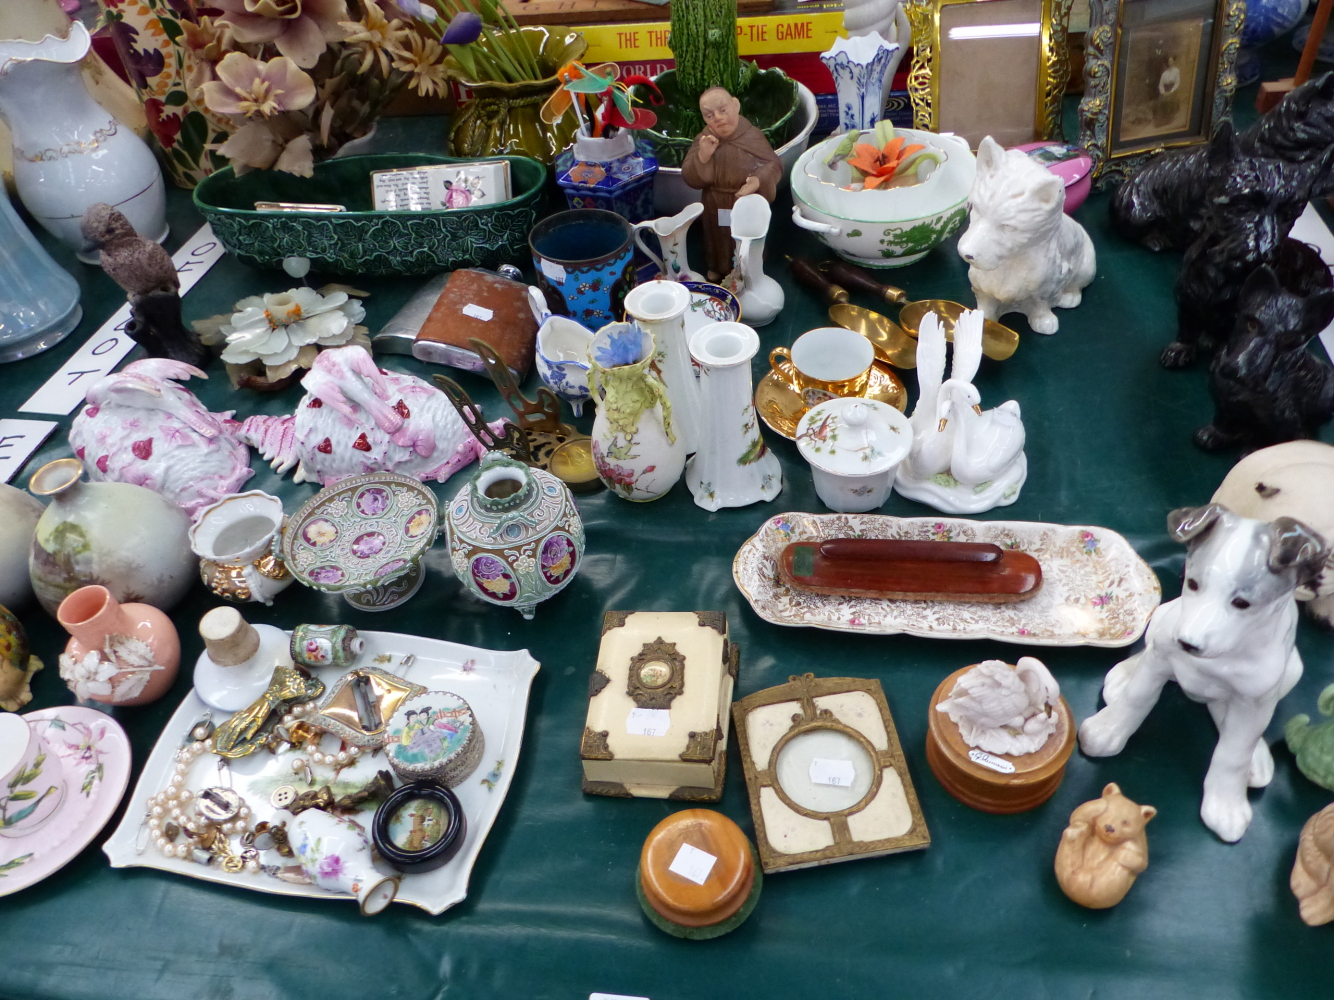 VARIOUS ORNAMENTAL CHINAWARES, FIGURINES, BRASS PICTURE FRAMES, ETC.